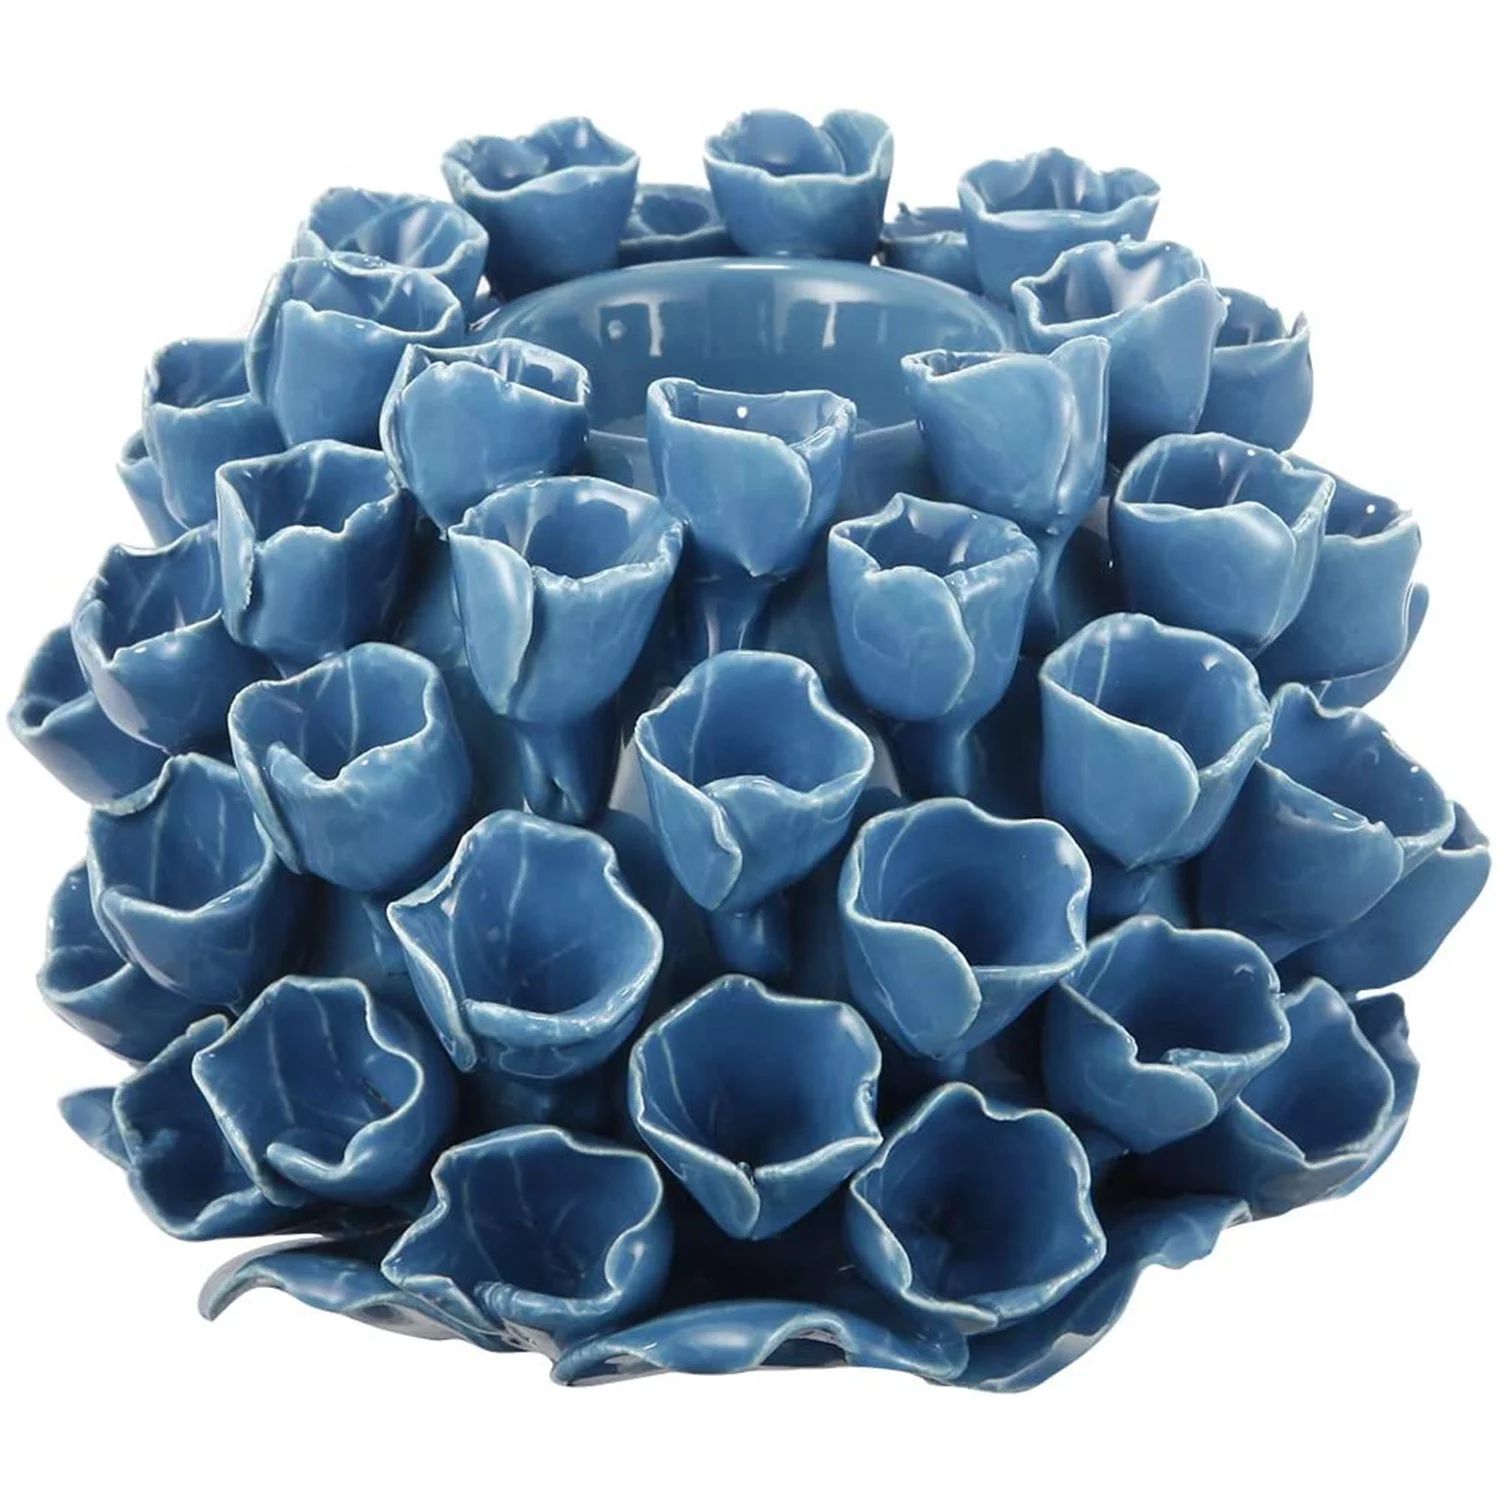 A&B Home Open Coral Candle Holder-Color:Blue,Style:Coastal | Walmart (US)